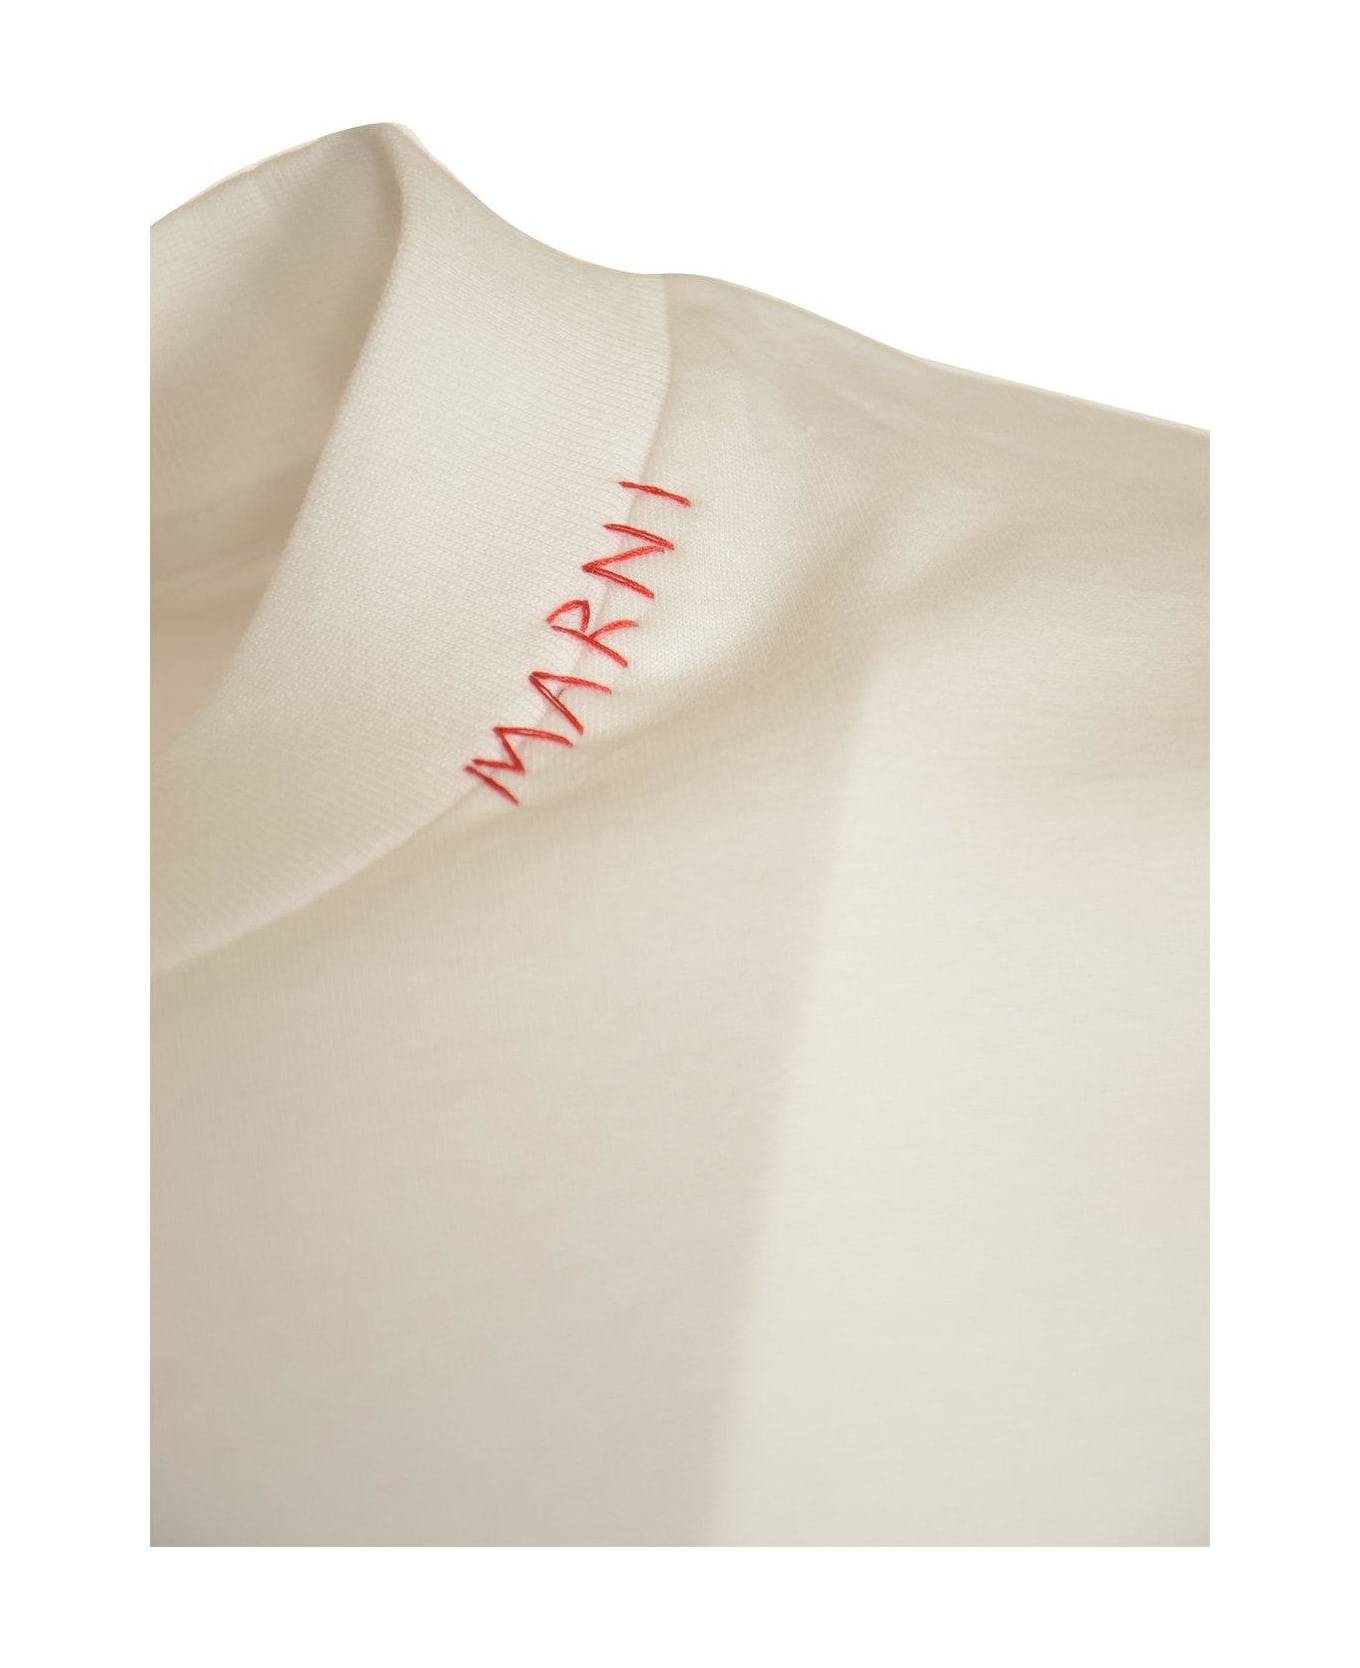 Marni Logo Embroidered Three Pack Of T-shirt - White シャツ